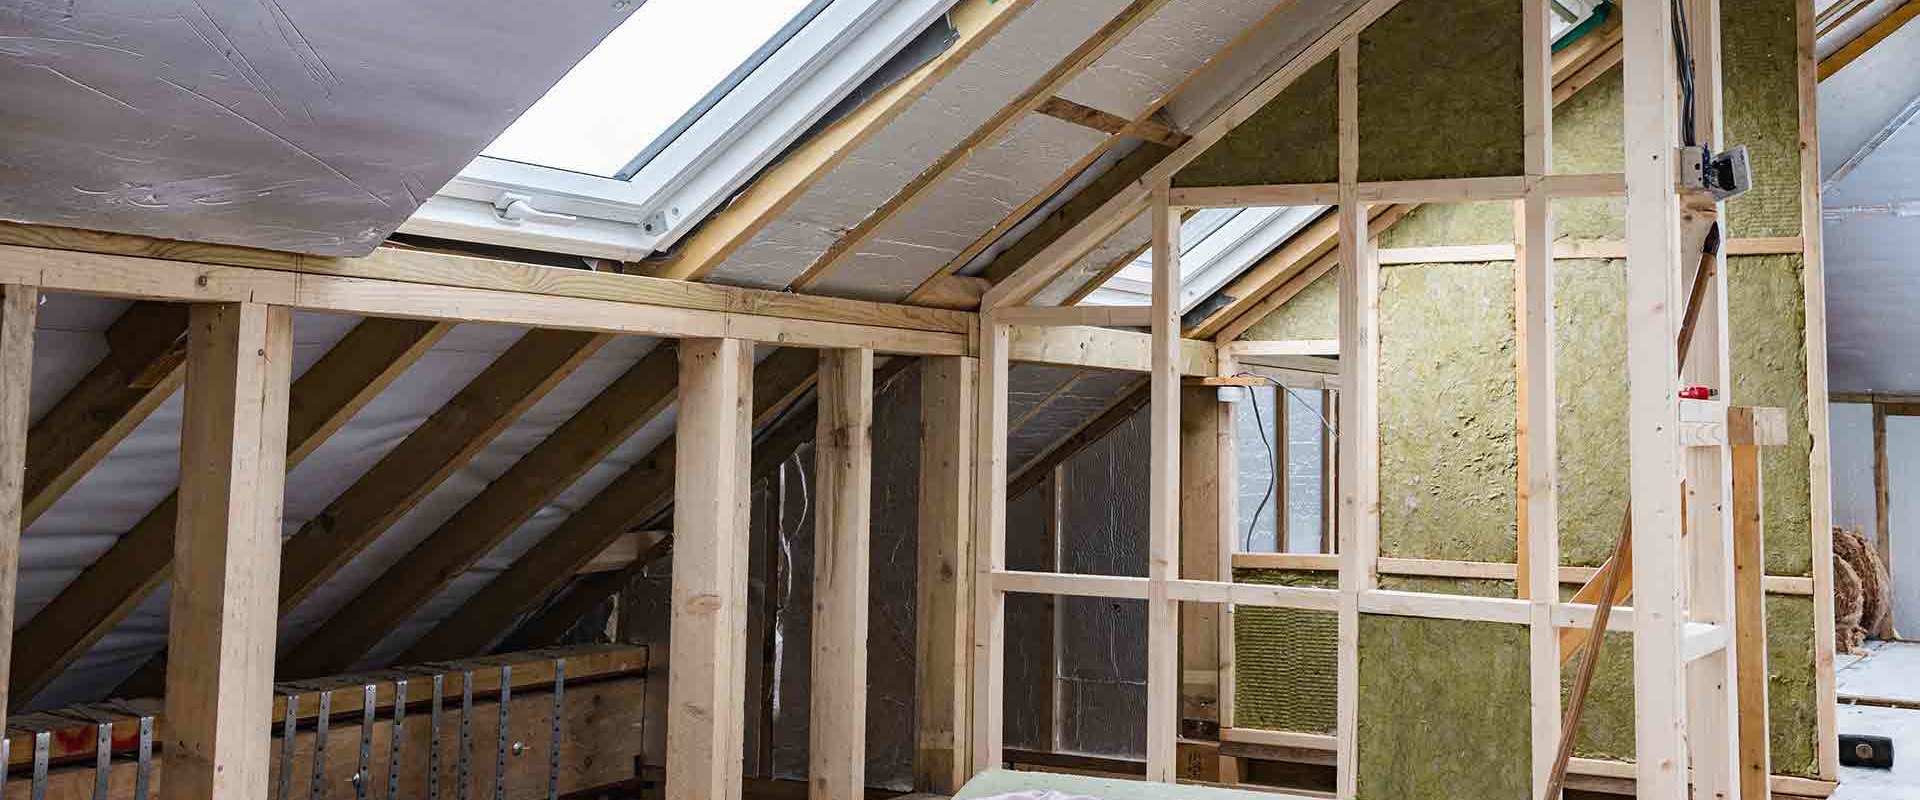 Is it ok to put insulation between roof rafters?